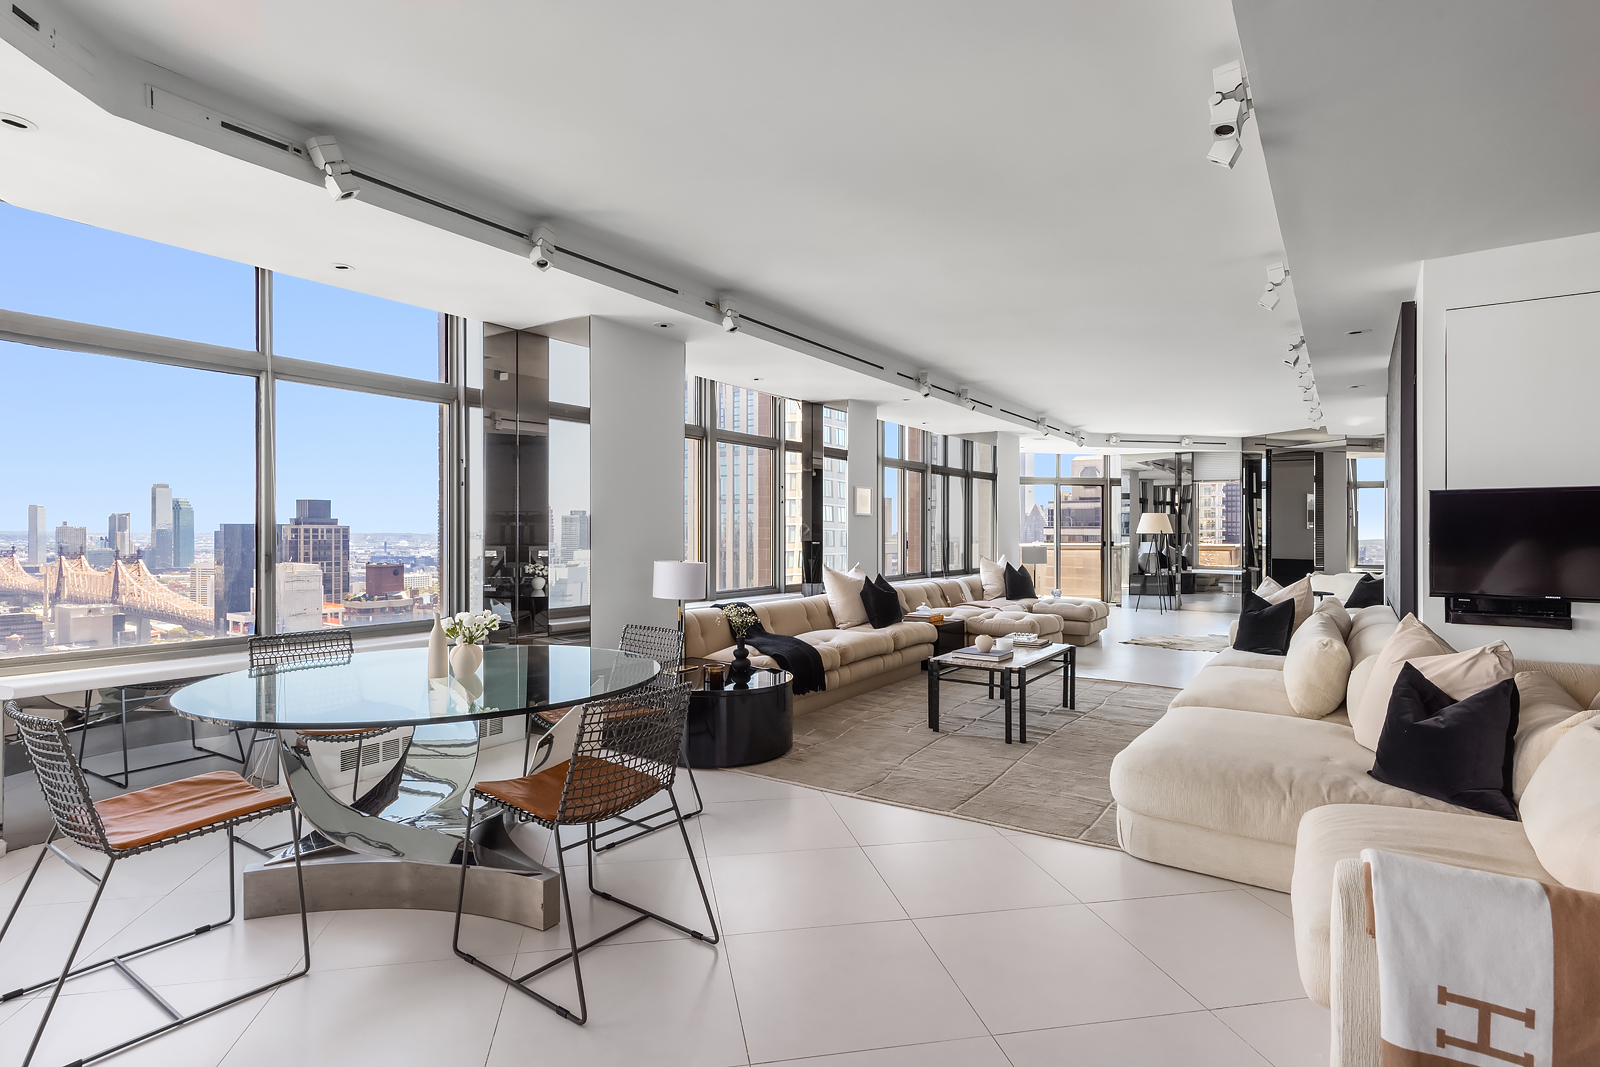 188 East 64th Street 3902/3903, Lenox Hill, Upper East Side, NYC - 4 Bedrooms  
3.5 Bathrooms  
9 Rooms - 